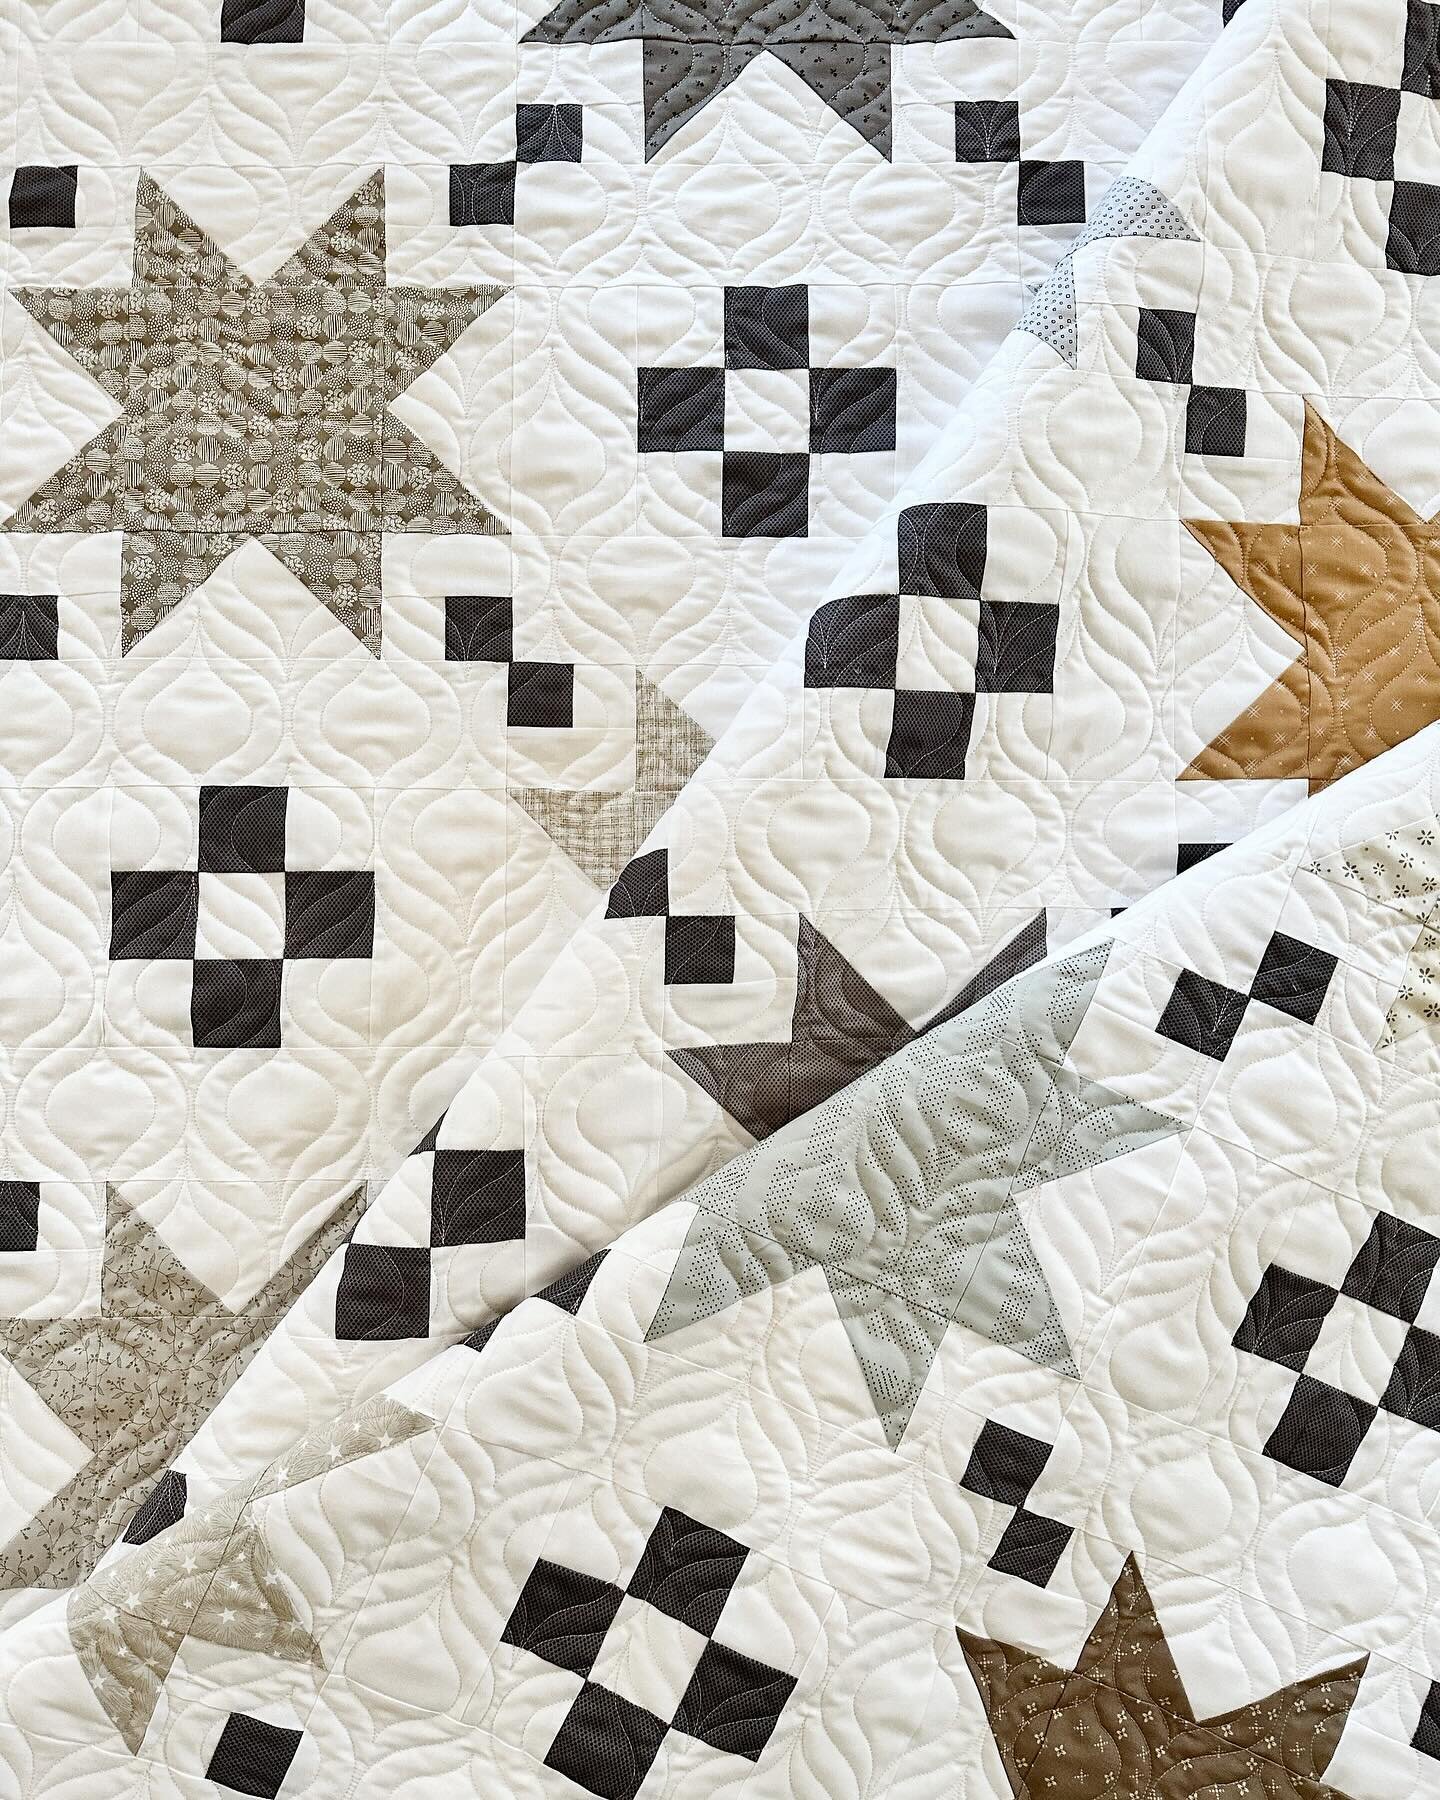 LeAnn made this absolutely stunning Modern Farmhouse quilt by Amanda Niederhauser from @jedicraftgirl which is in her More Playful Precuts book, available on Amazon.  It&rsquo;s a stunner, huh?!

We decided on the Taj Mahal - Echoed panto by Patricia